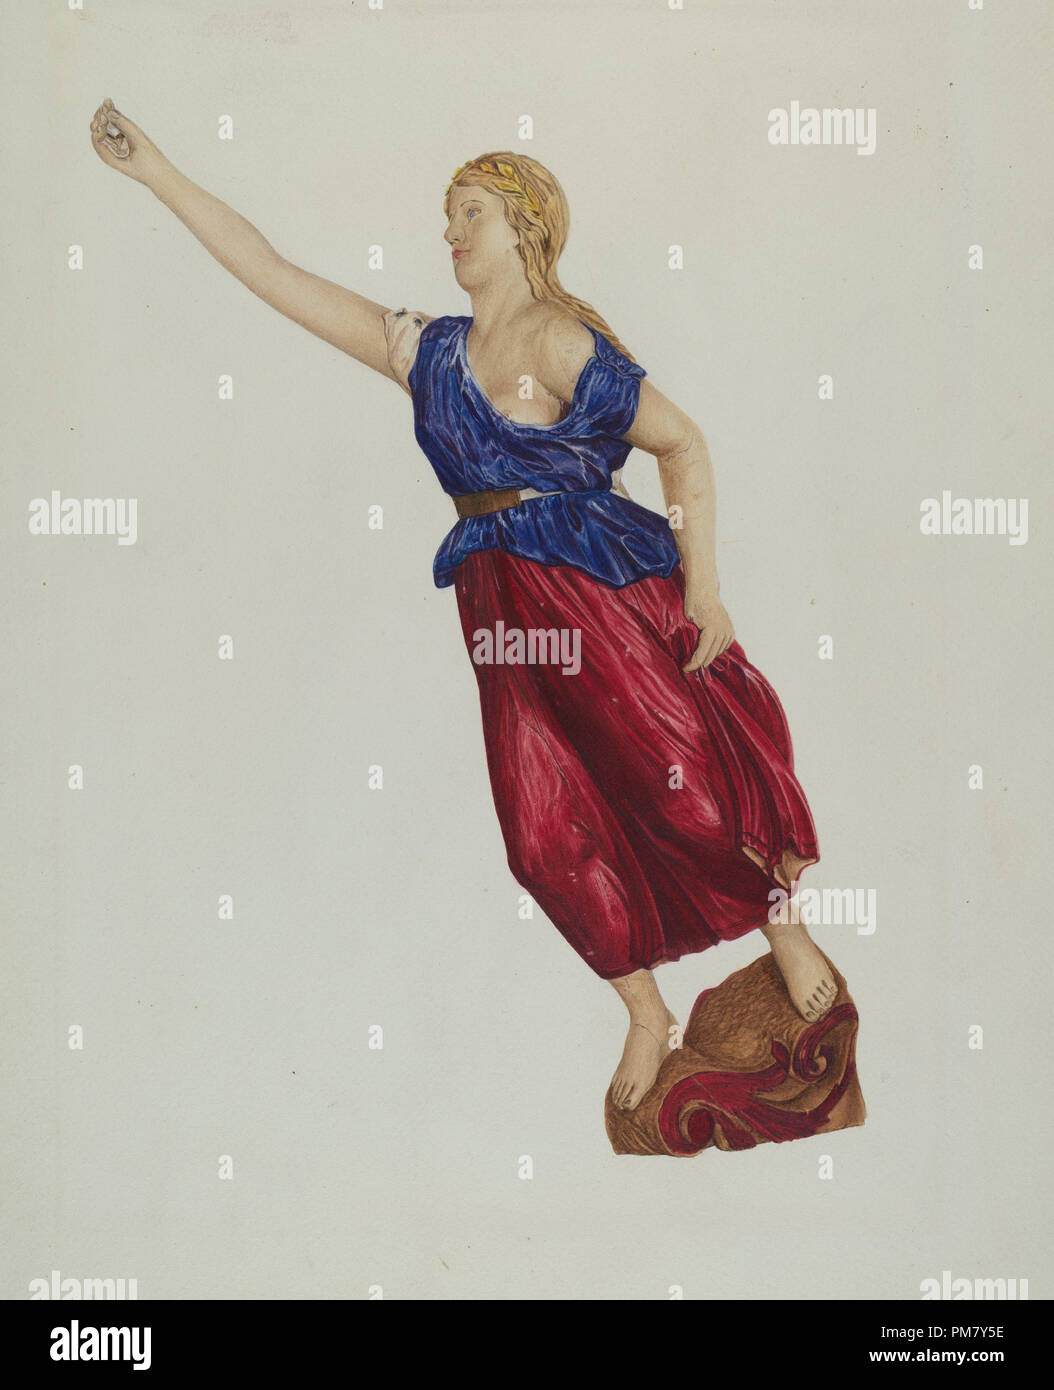 Ship's Figurehead. Dated: c. 1939. Dimensions: overall: 43.9 x 34 cm (17 5/16 x 13 3/8 in.). Medium: watercolor and graphite on paper. Museum: National Gallery of Art, Washington DC. Author: Lucille Lacoursiere. Stock Photo